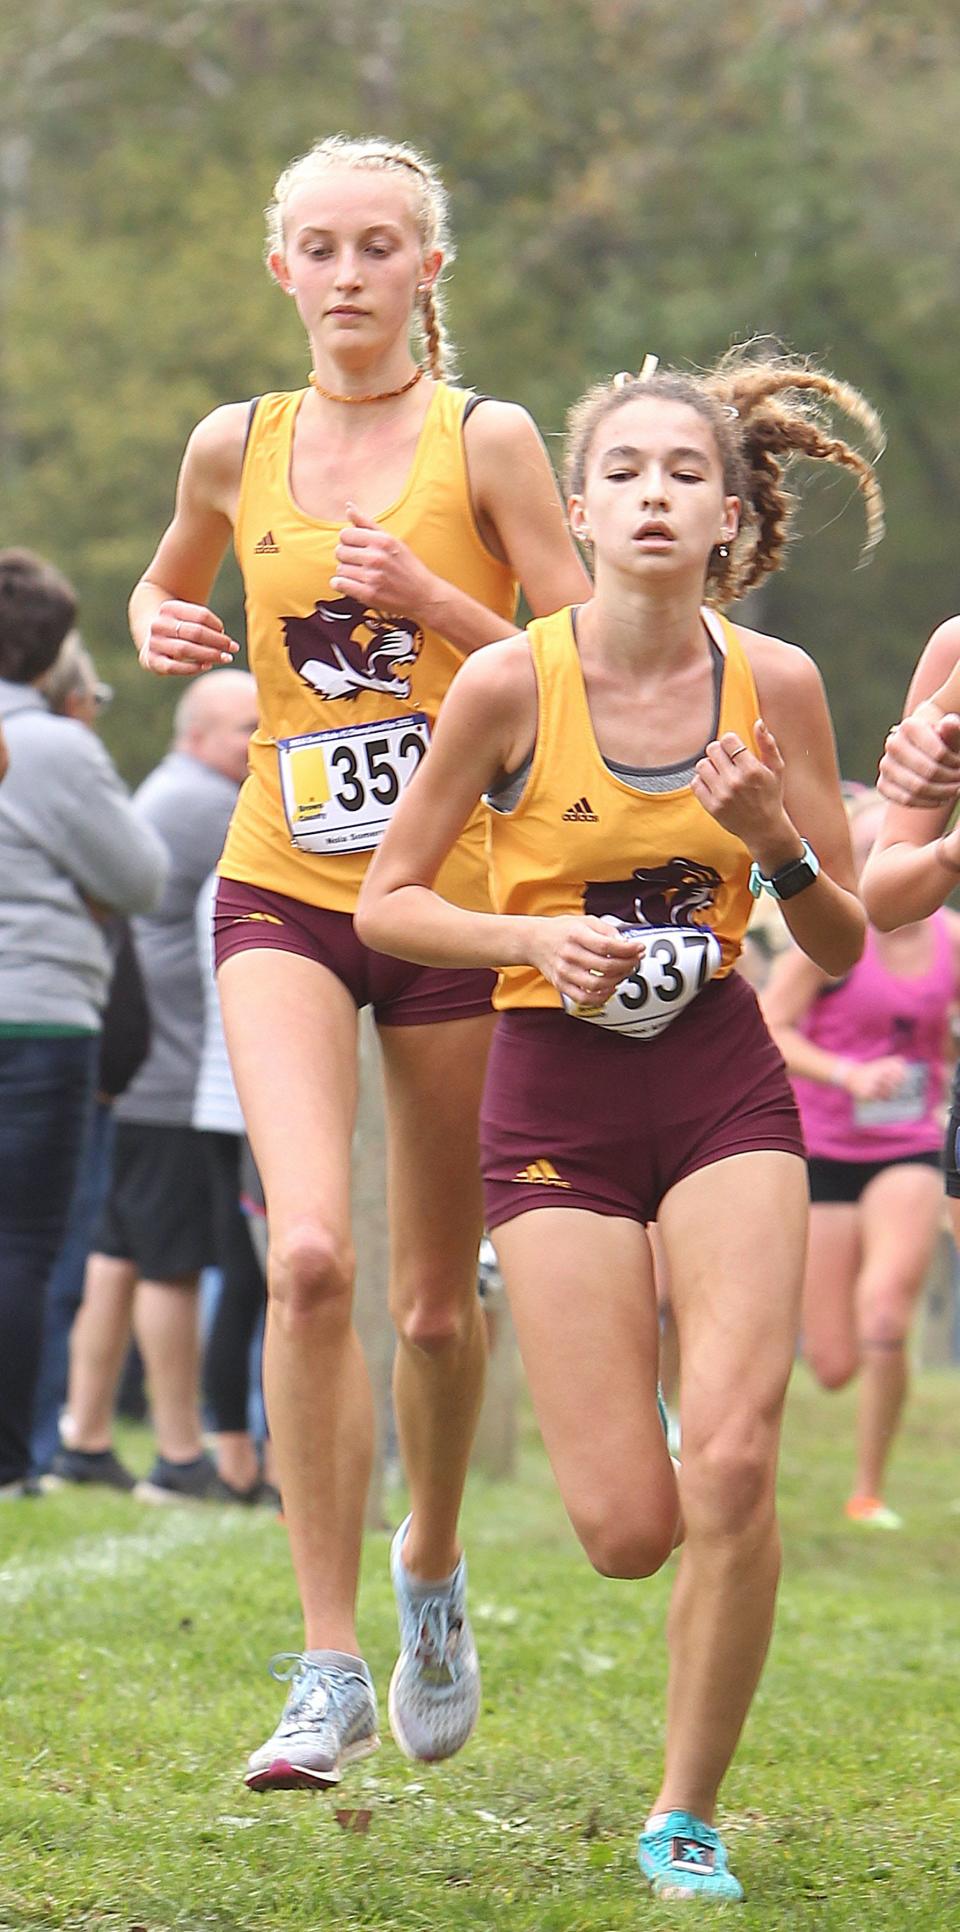 Bloomington North's Rachel Allison (337) and Nola Sommers Glenn (352) compete in the Brown County cross country semi-state meet on Saturday, Oct. 23, 2021.